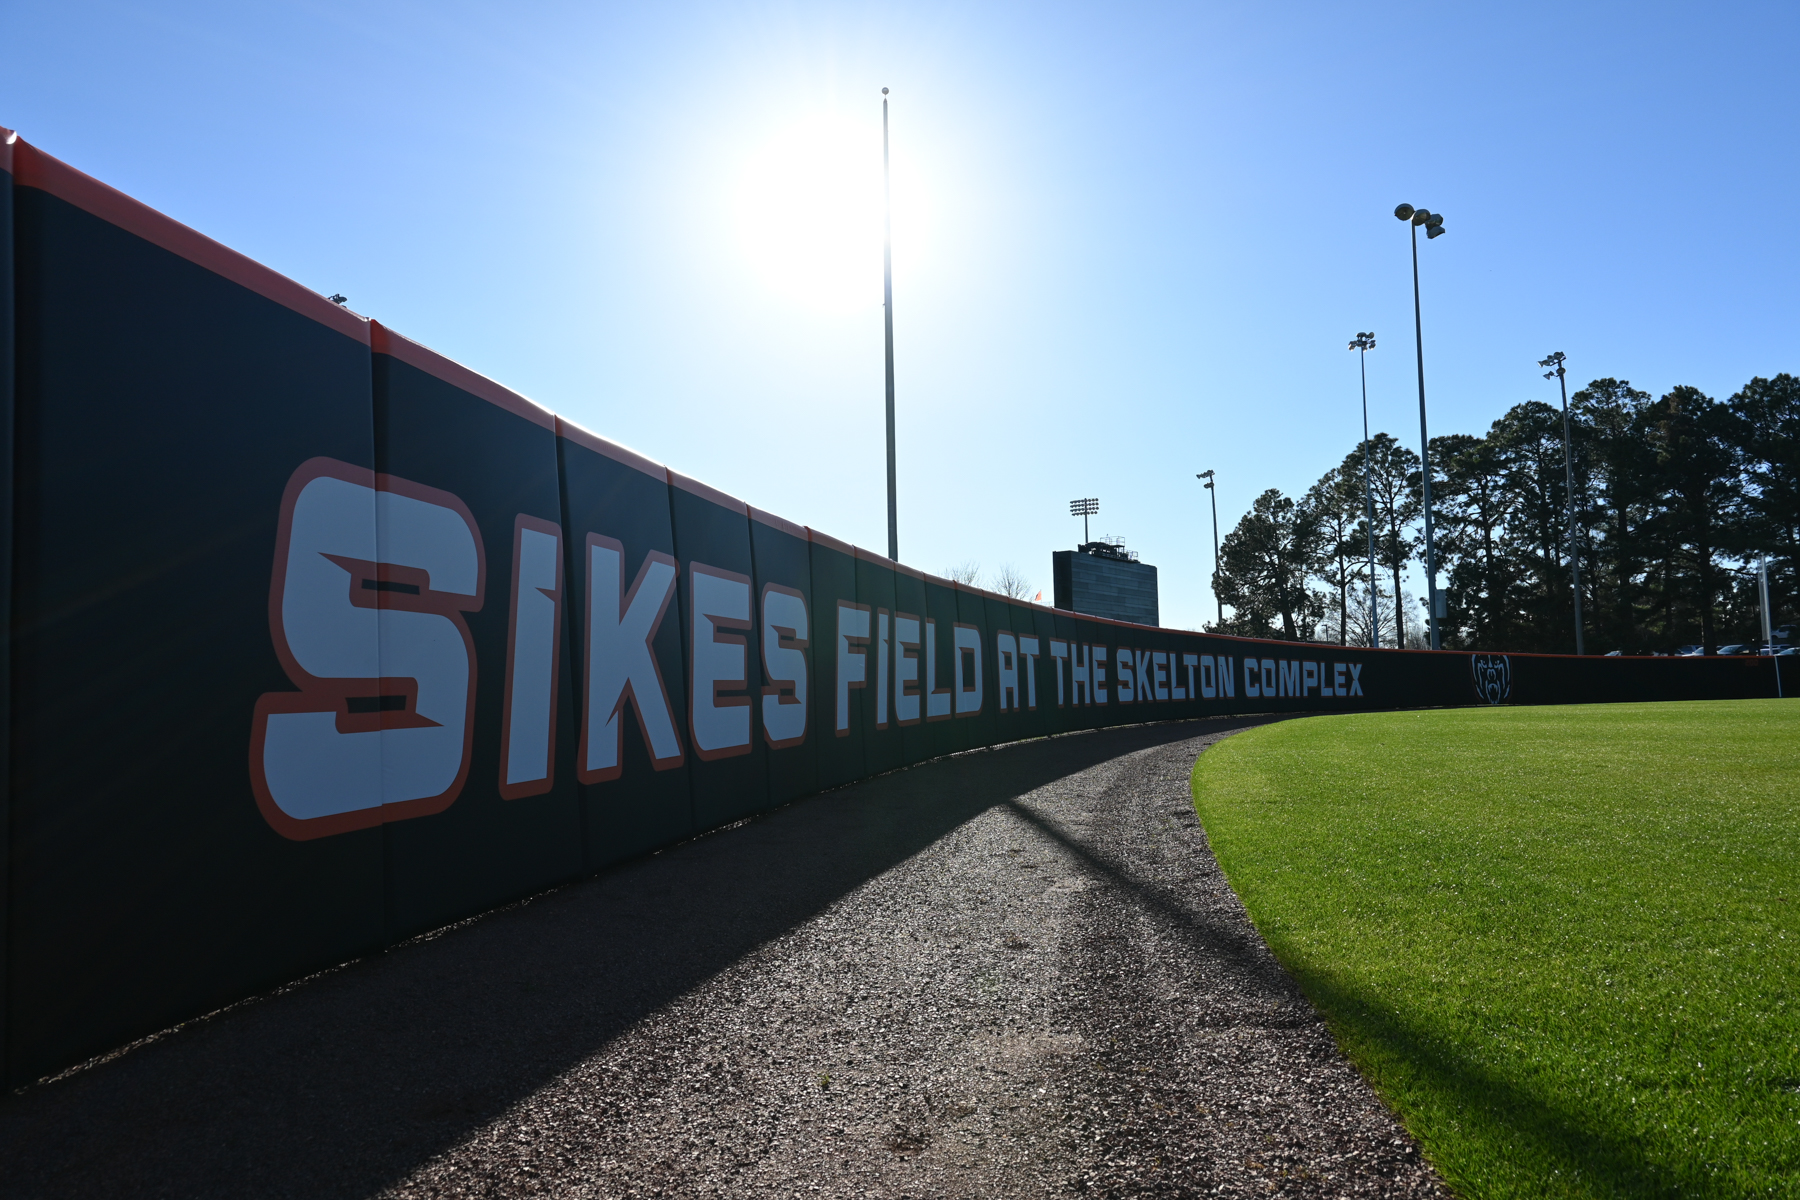 outfield wall says sikes field at the skelton complex